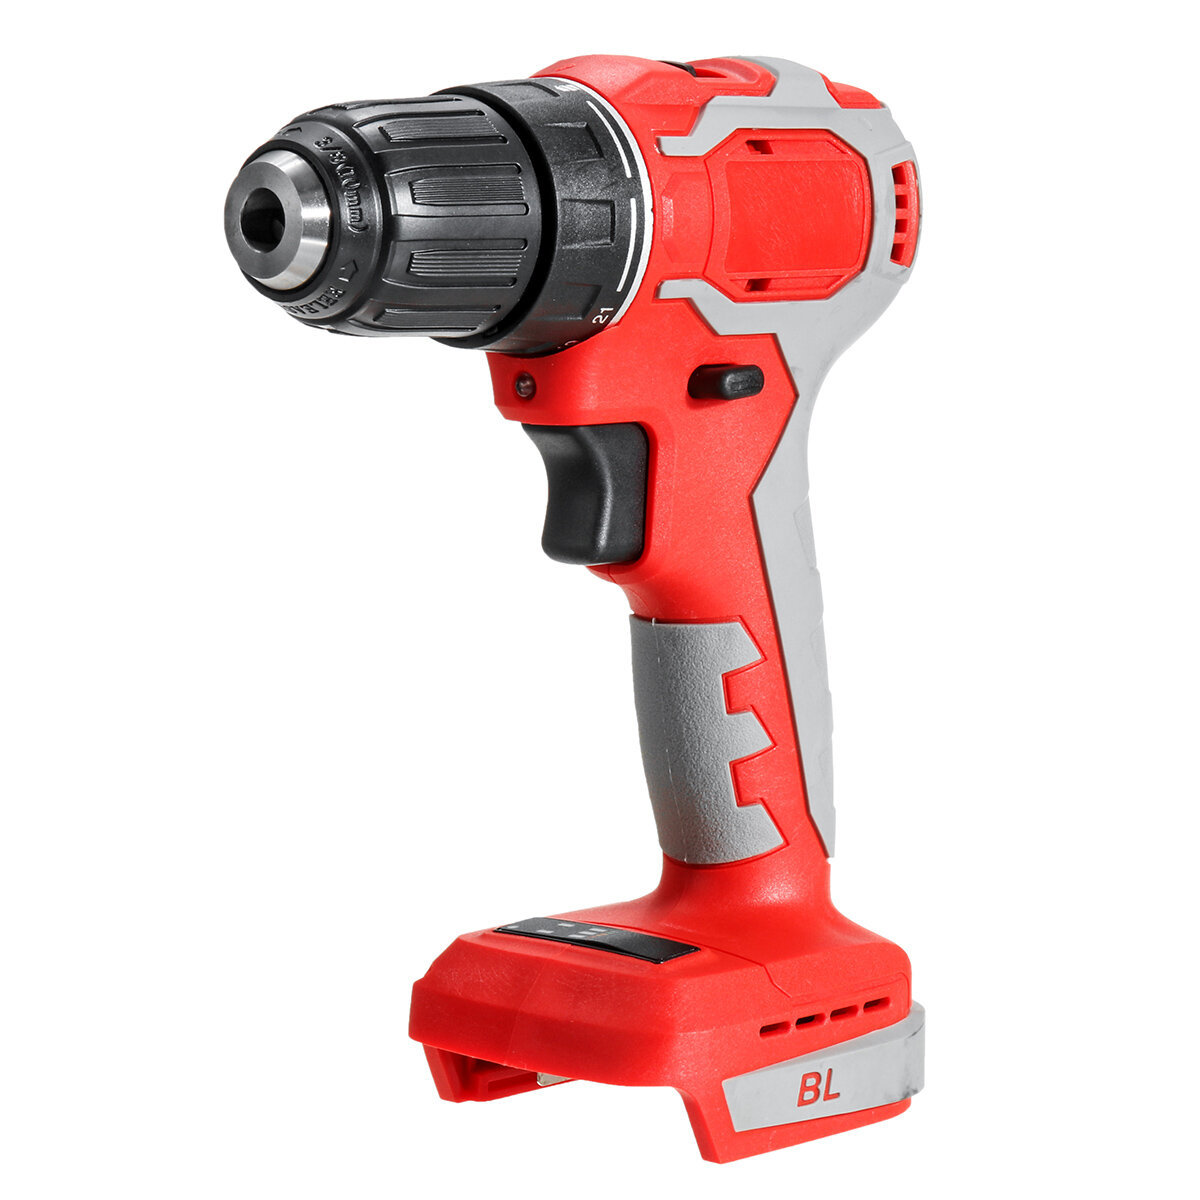 13mm Cordless Brushless Electric Drill Screwdriver 1800rpm 2 Speed with LED Working Light 21+1 Stage Setting Mode